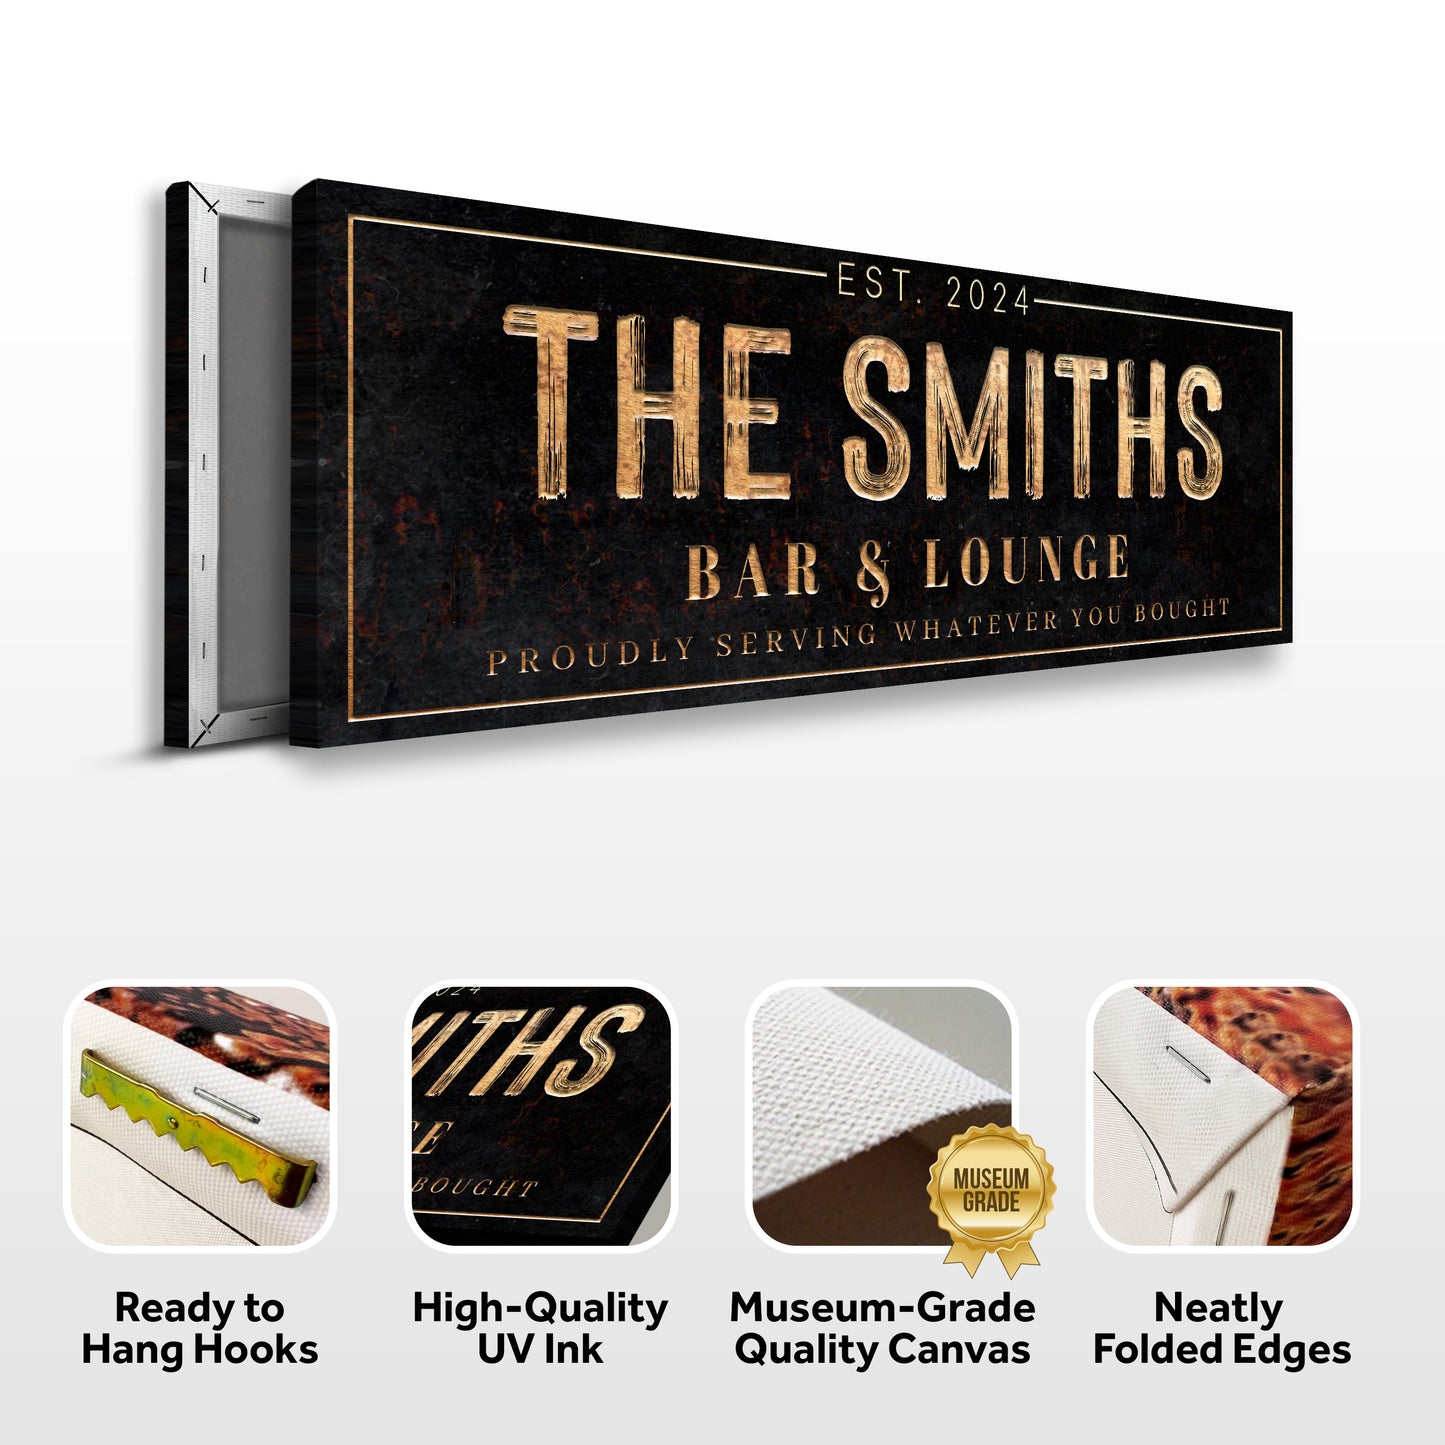 Custom Bar & Lounge Sign Specs - Image by Tailored Canvases